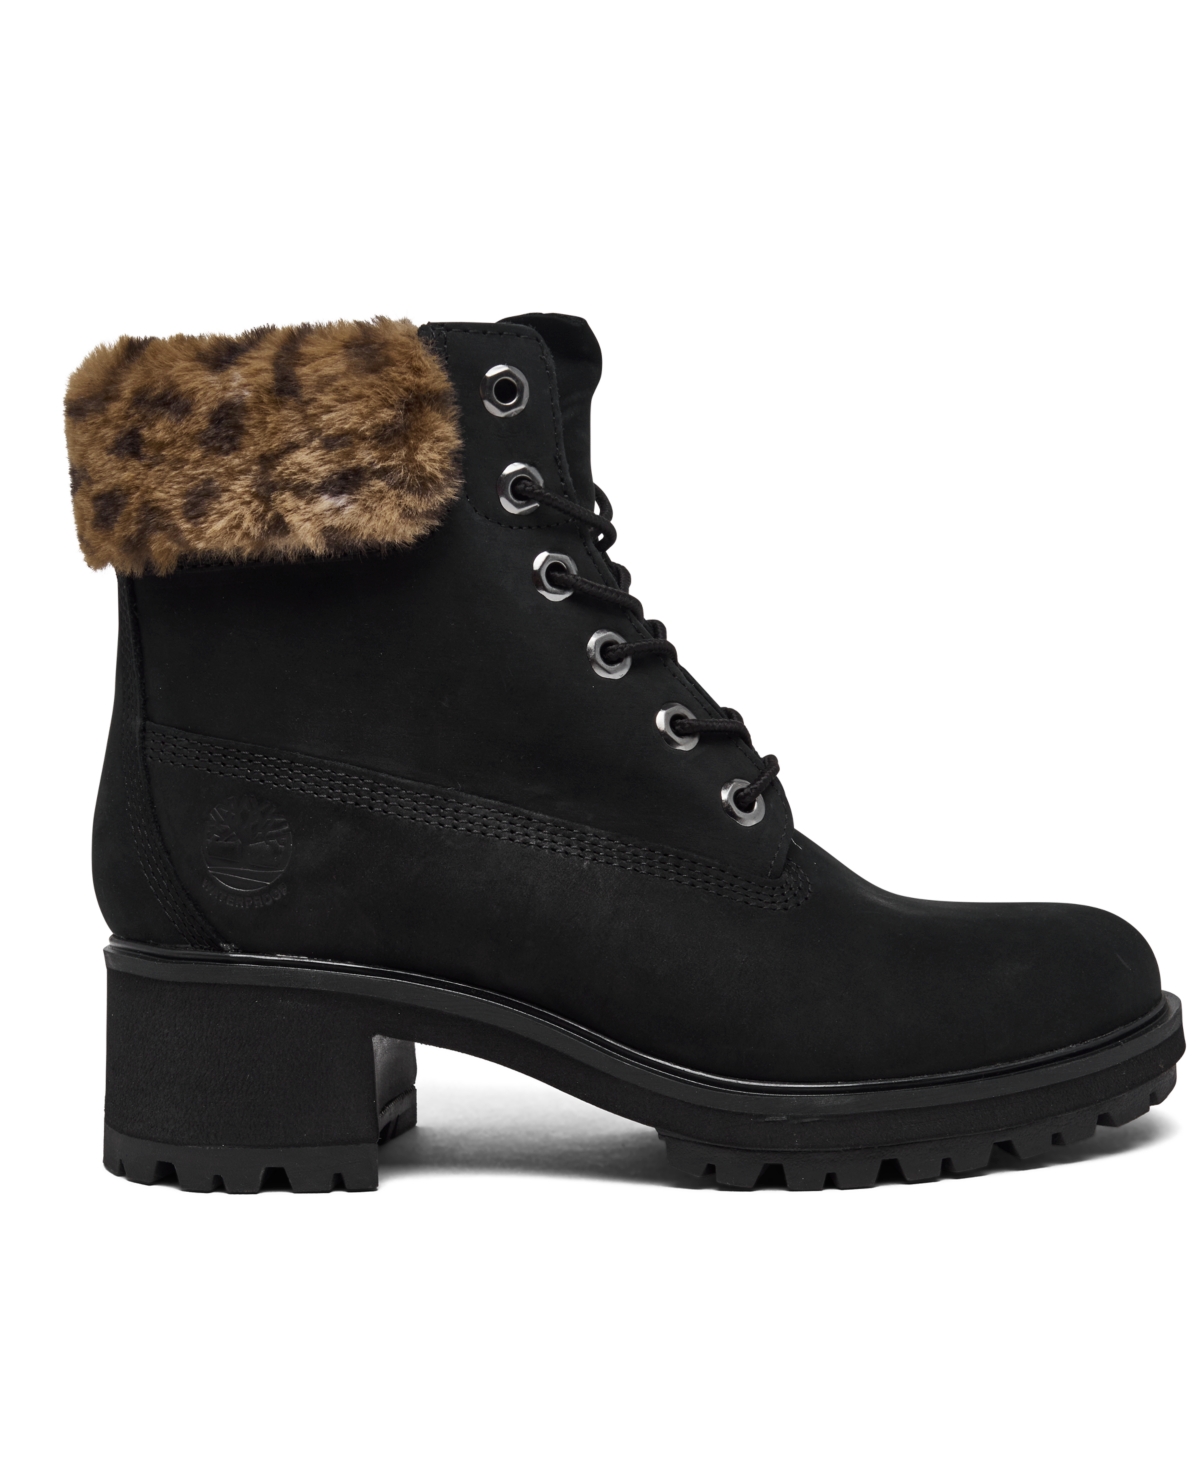 Shop Timberland Women's Kinsley 6" Water Resistant Boots From Finish Line In Black,leopard